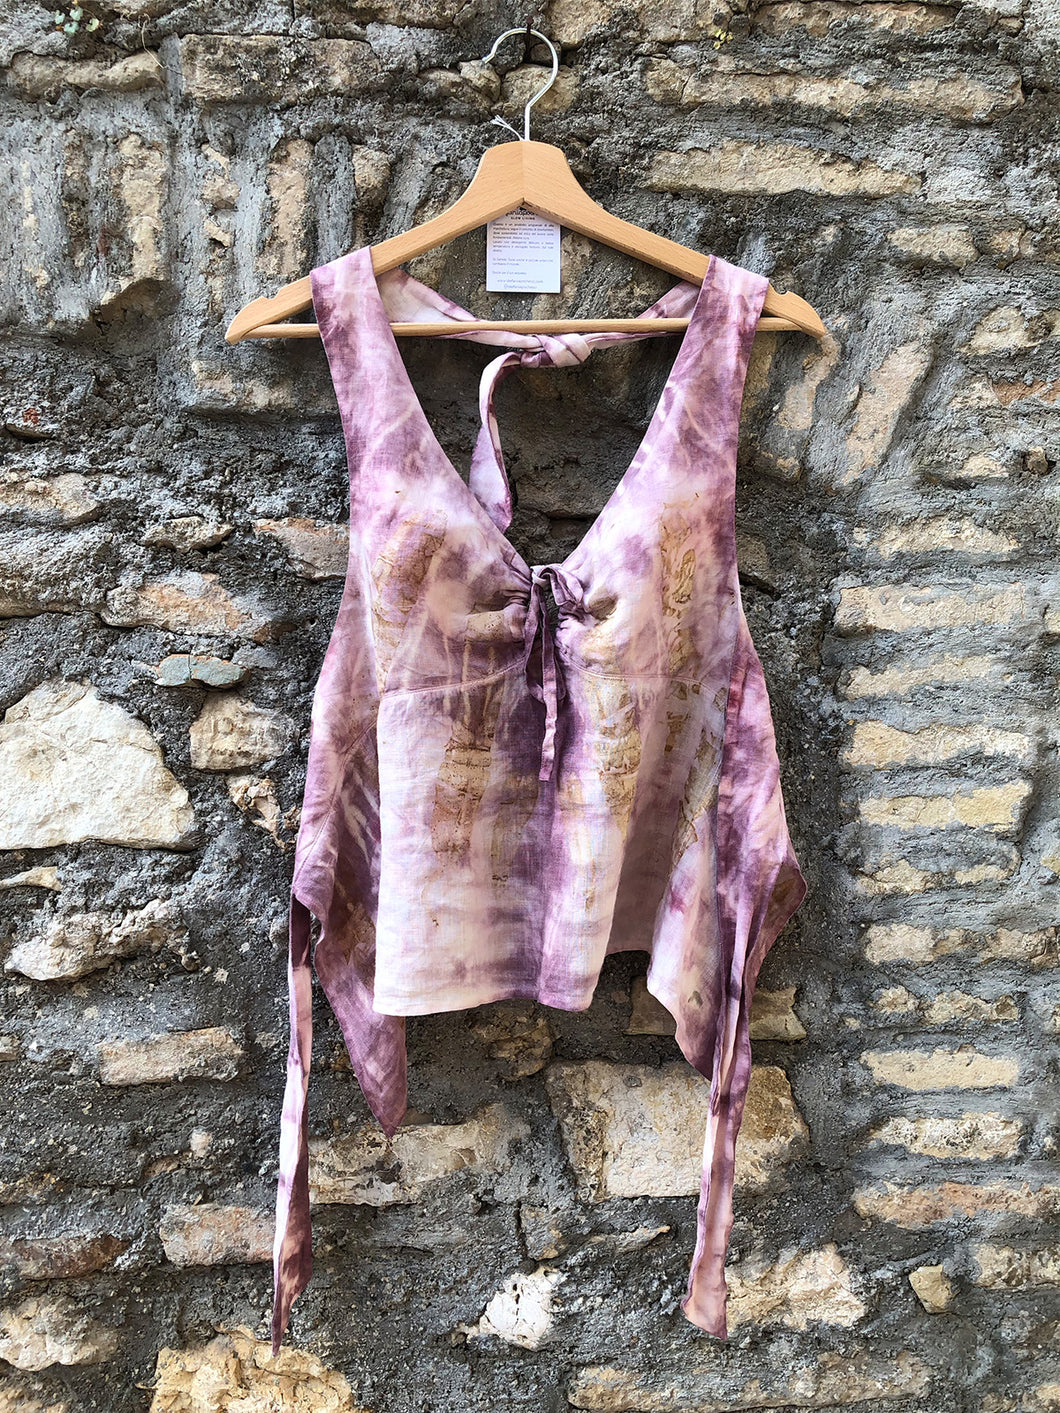 Top Splendore - Hand-dyed Linen  - Ecoprint and vegetable dye